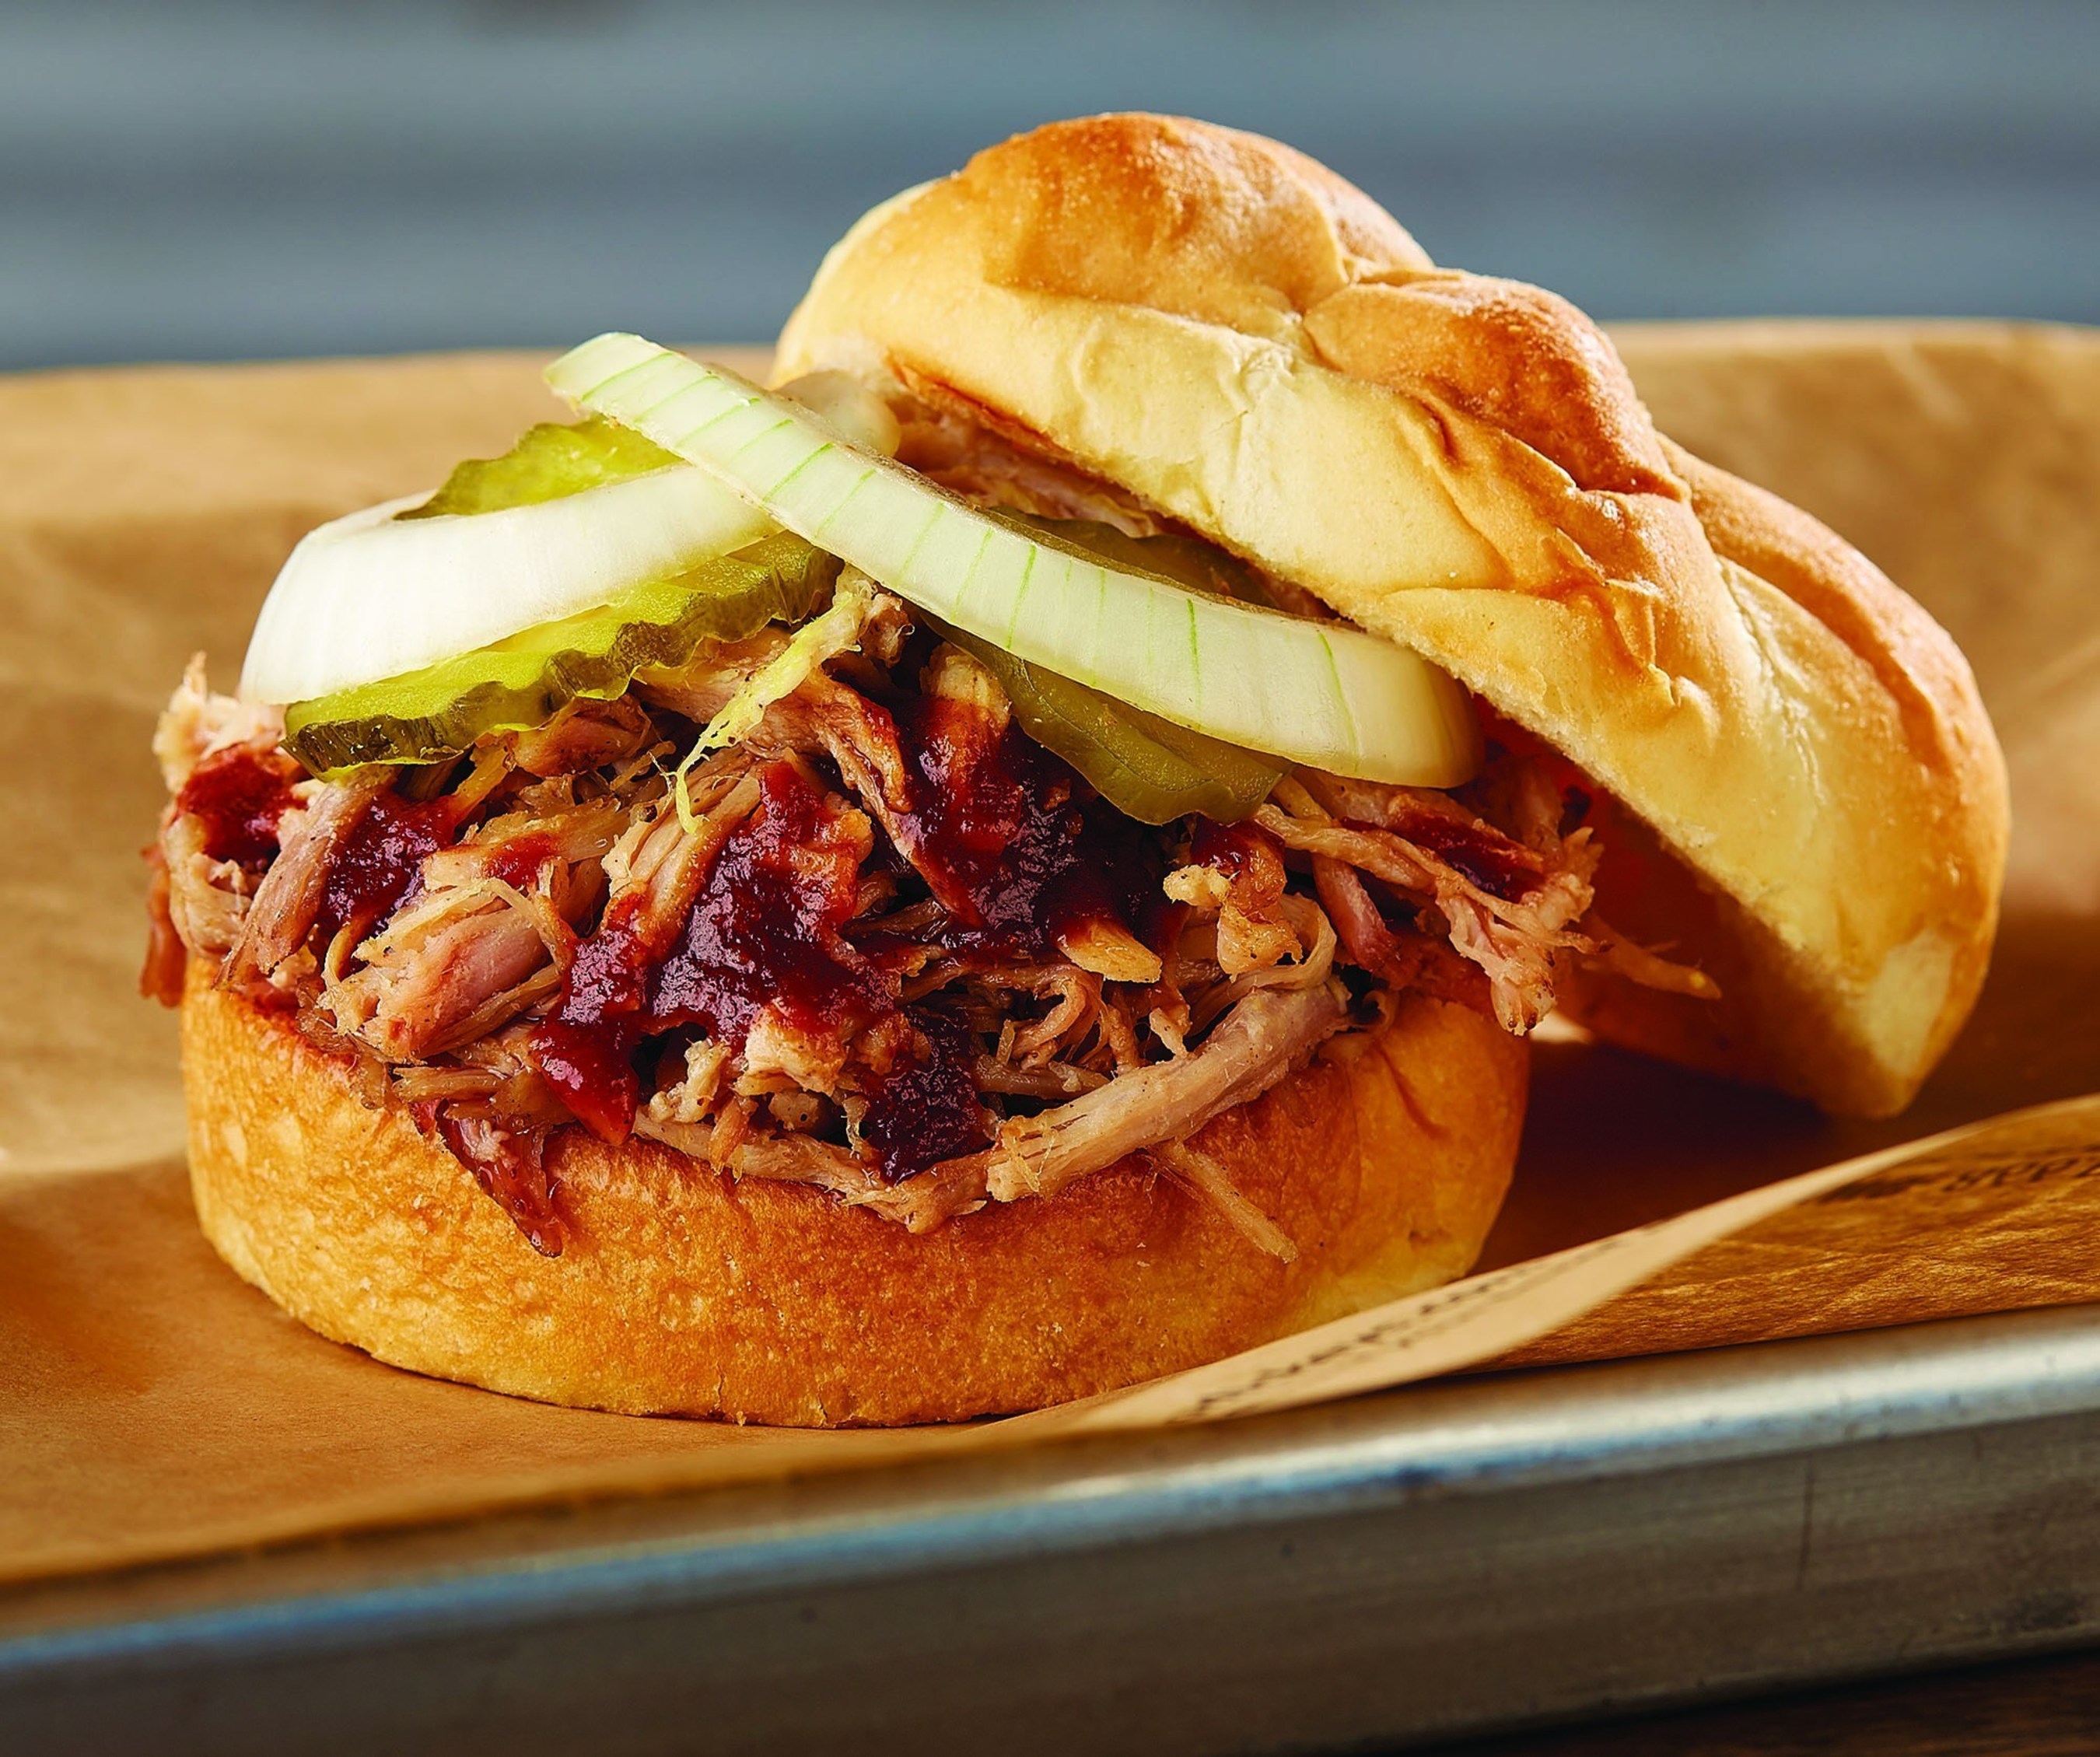 Dickey's Barbecue Pit opens first location in San Diego this Thursday with a three day grand opening celebration. Saturday includes $2 sandwiches and three chances to win free barbecue for a year!